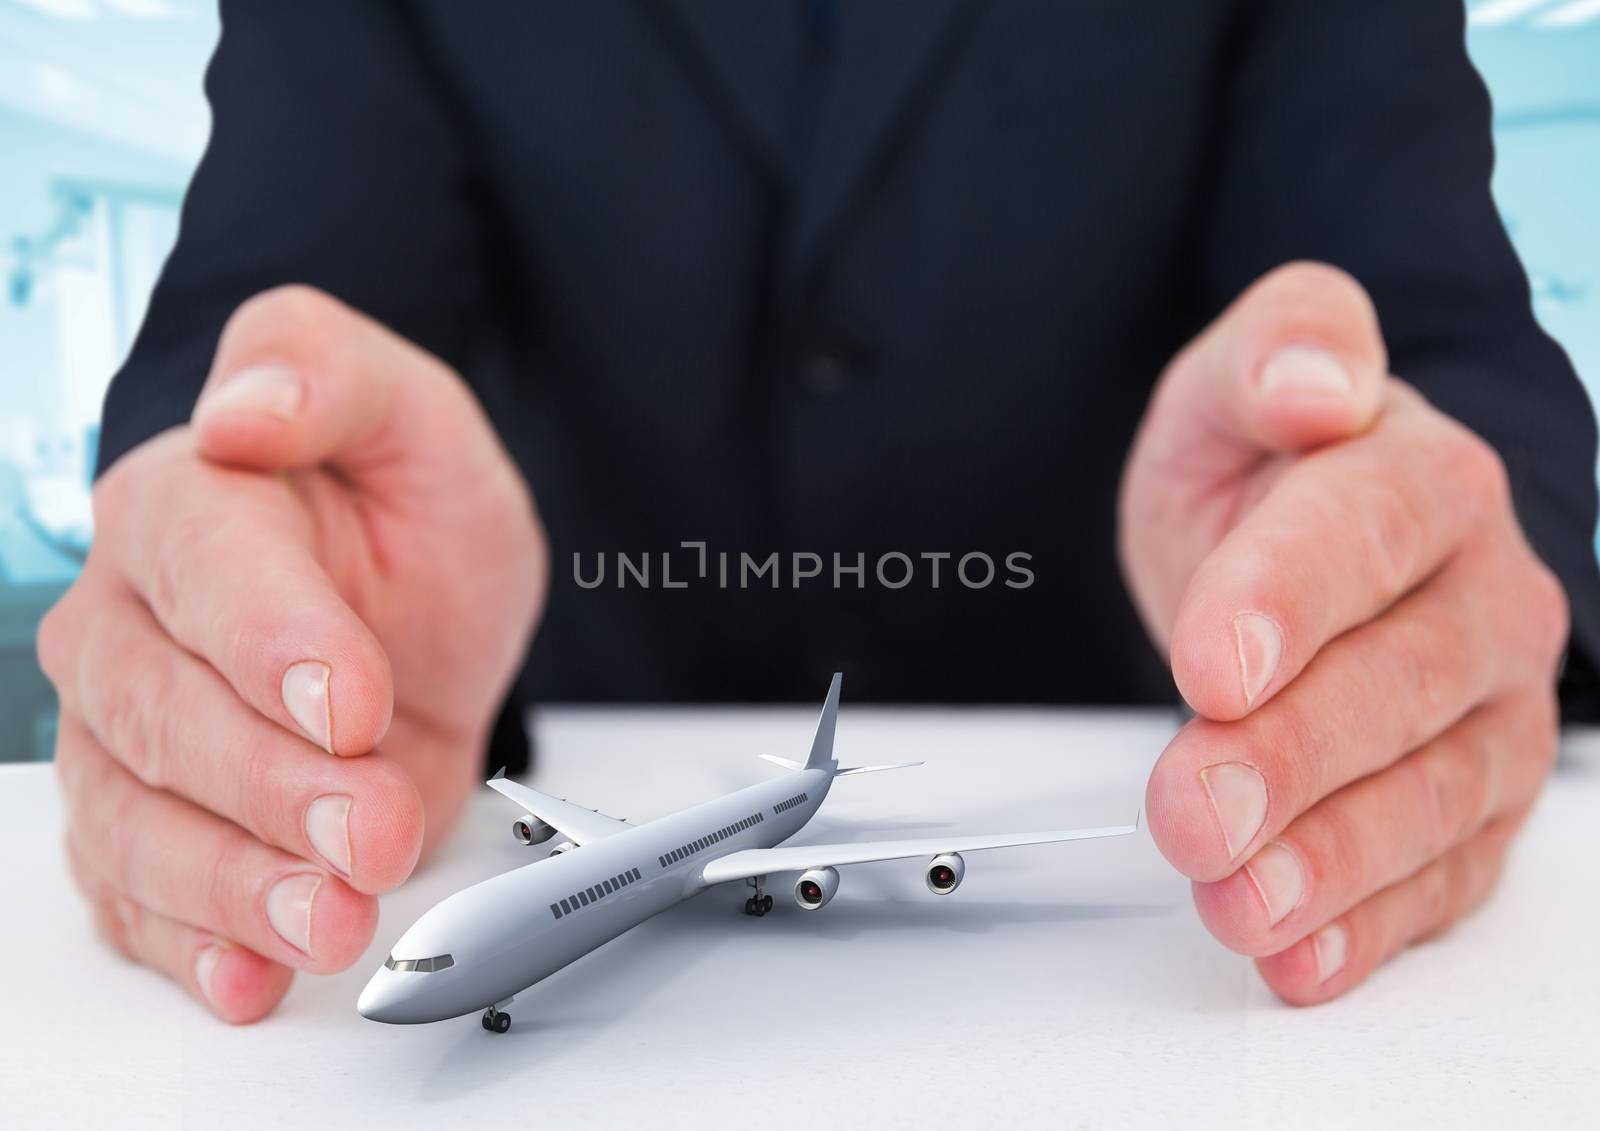 Digital composite image of airplane model surrounded by hands in gesture of protection